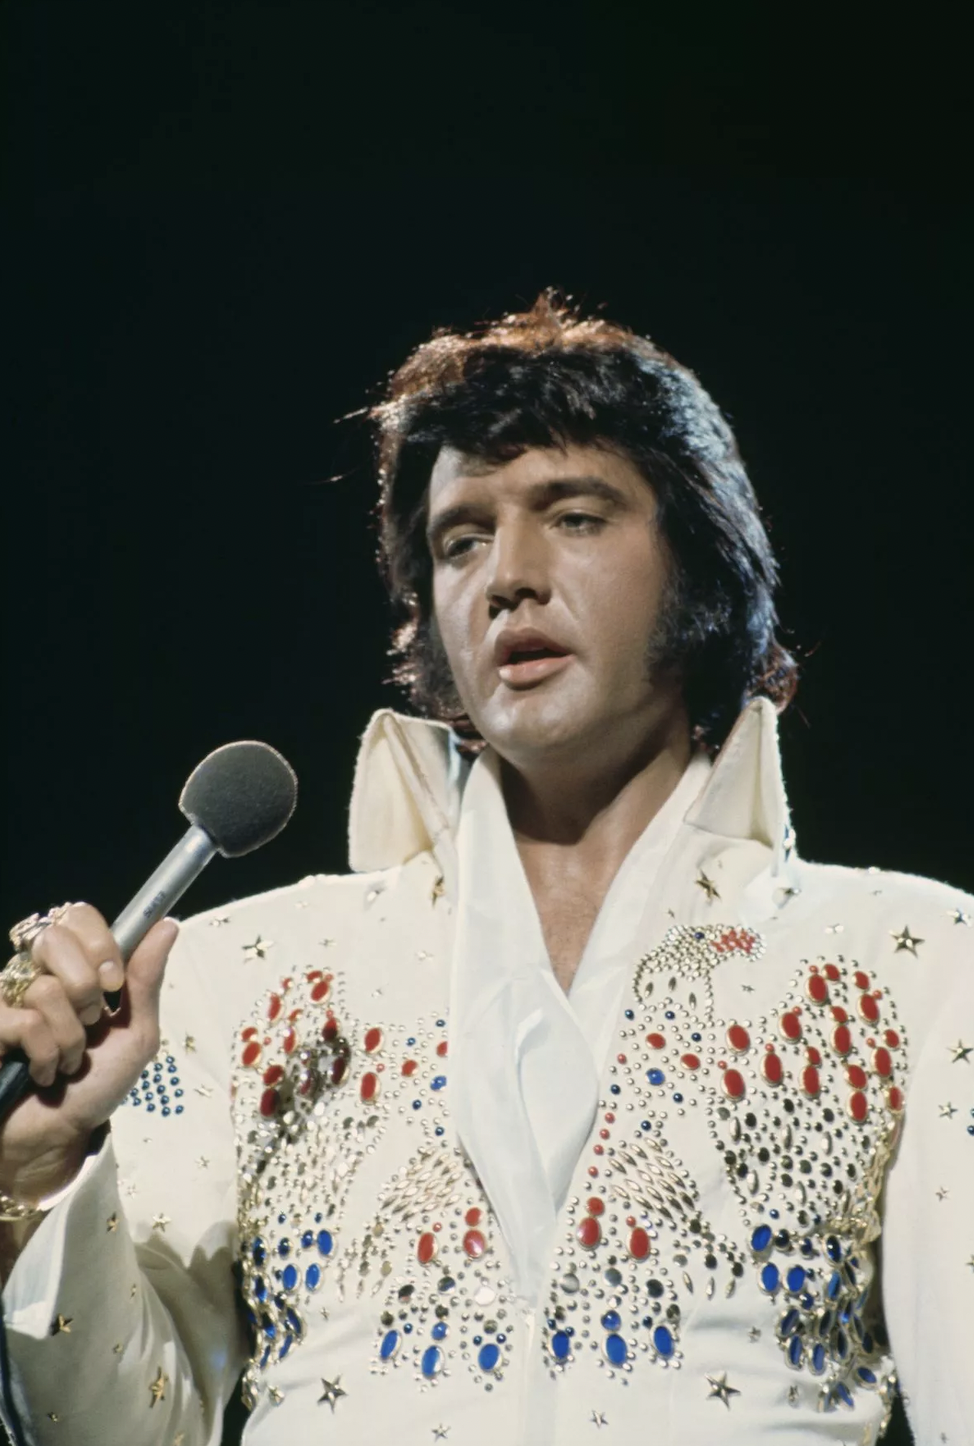 Elvis Presley spent seven years performing at the Las Vegas Hilton before his death, and rumor has it you can still see him backstage from time to time. 